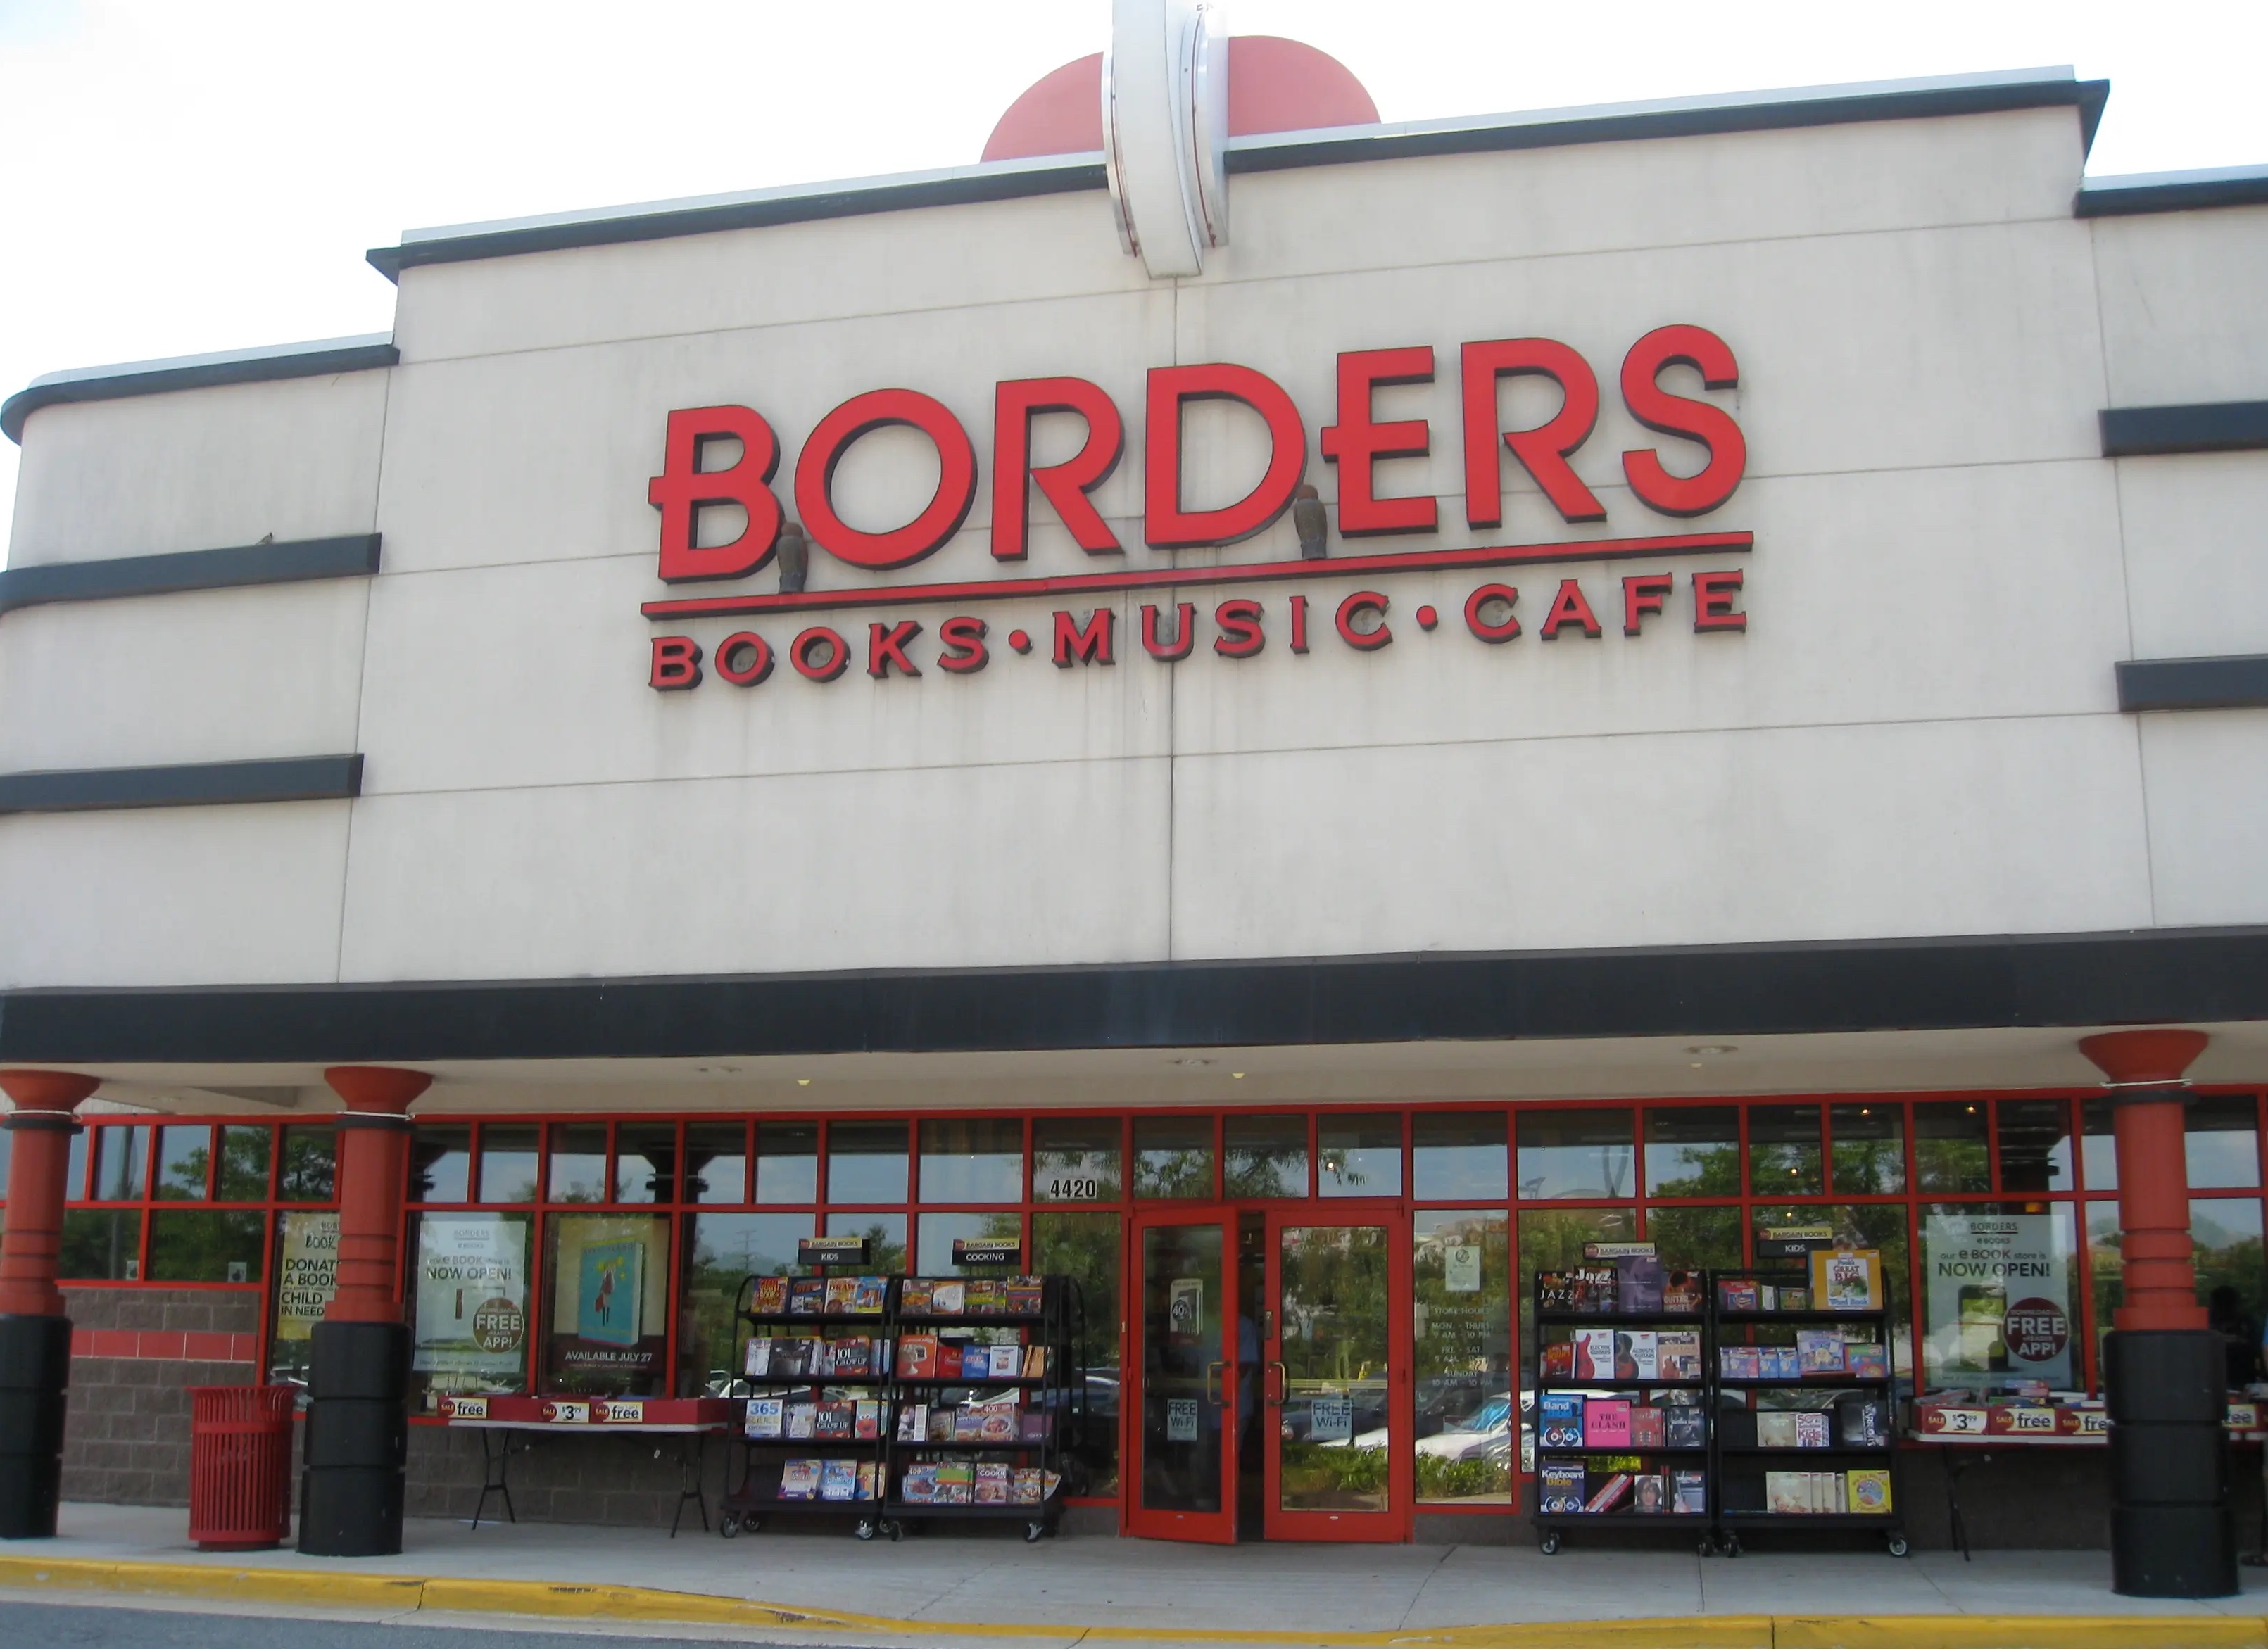 Defunct Companies -outlet store - Borders Books Music.Cafe Rinn Bied Unte